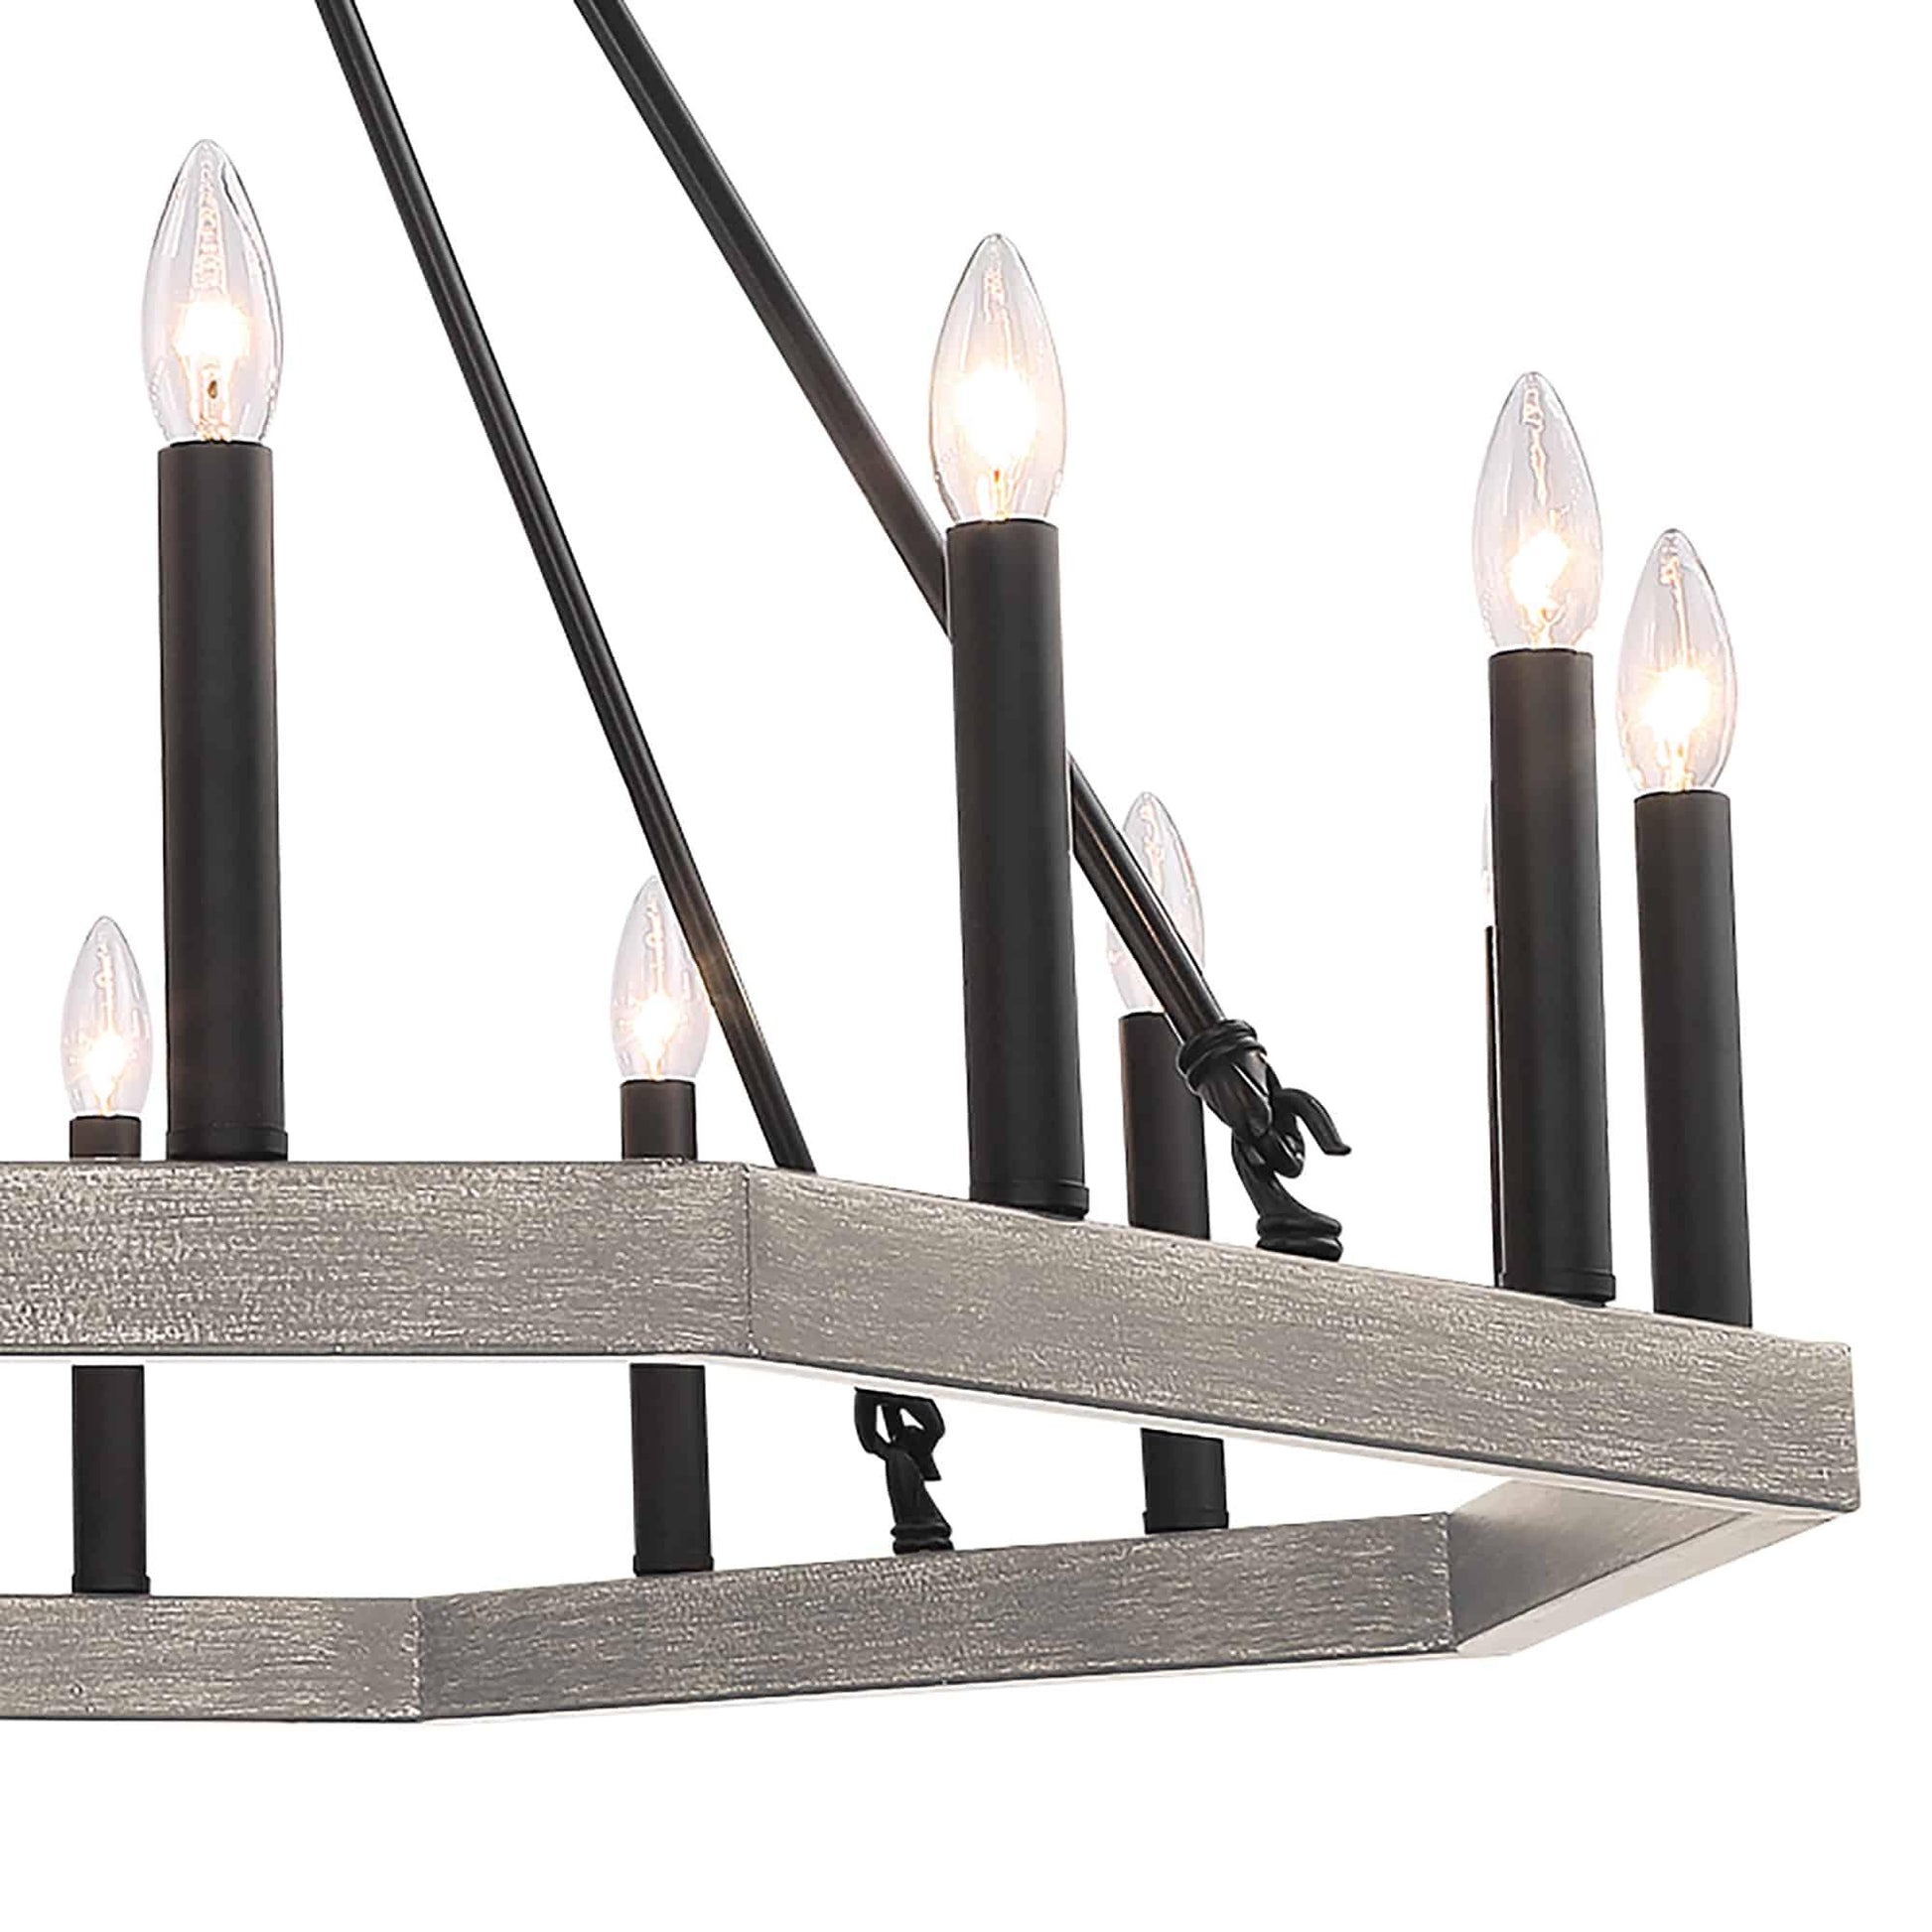 16 light candle style wagon wheel chandelier 1 (6) by ACROMA